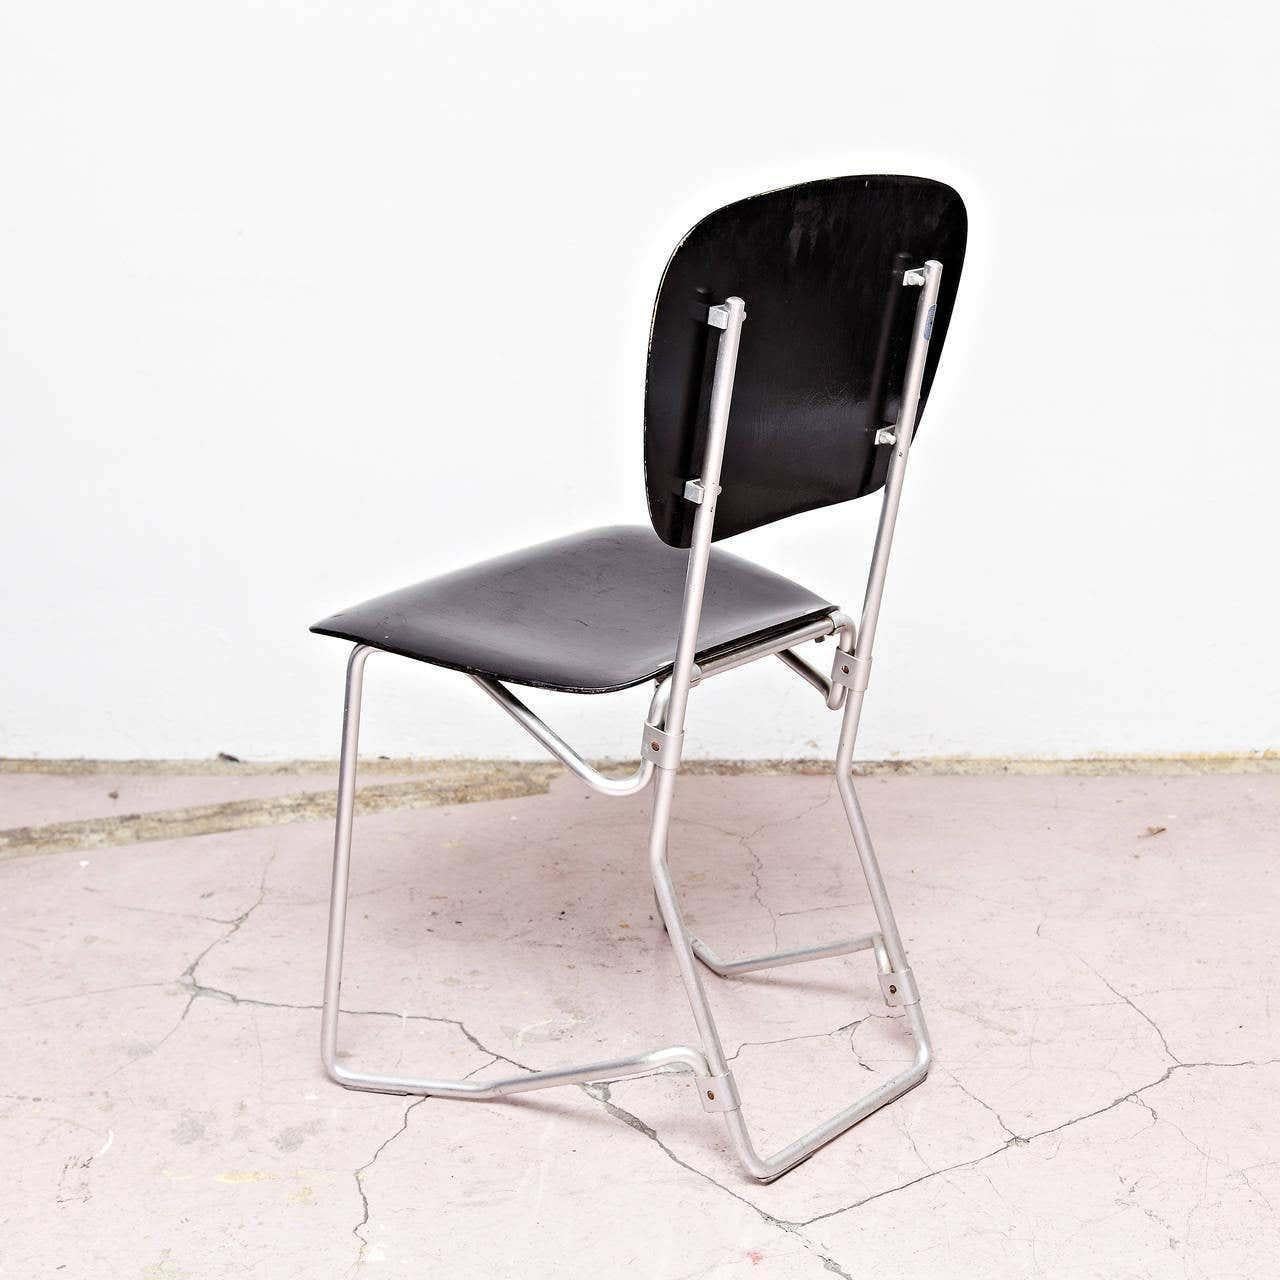 Aluminum Armin Wirth Mid-Century Modern Metal and Wood Swiss Stackable Chairs for Aluflex For Sale